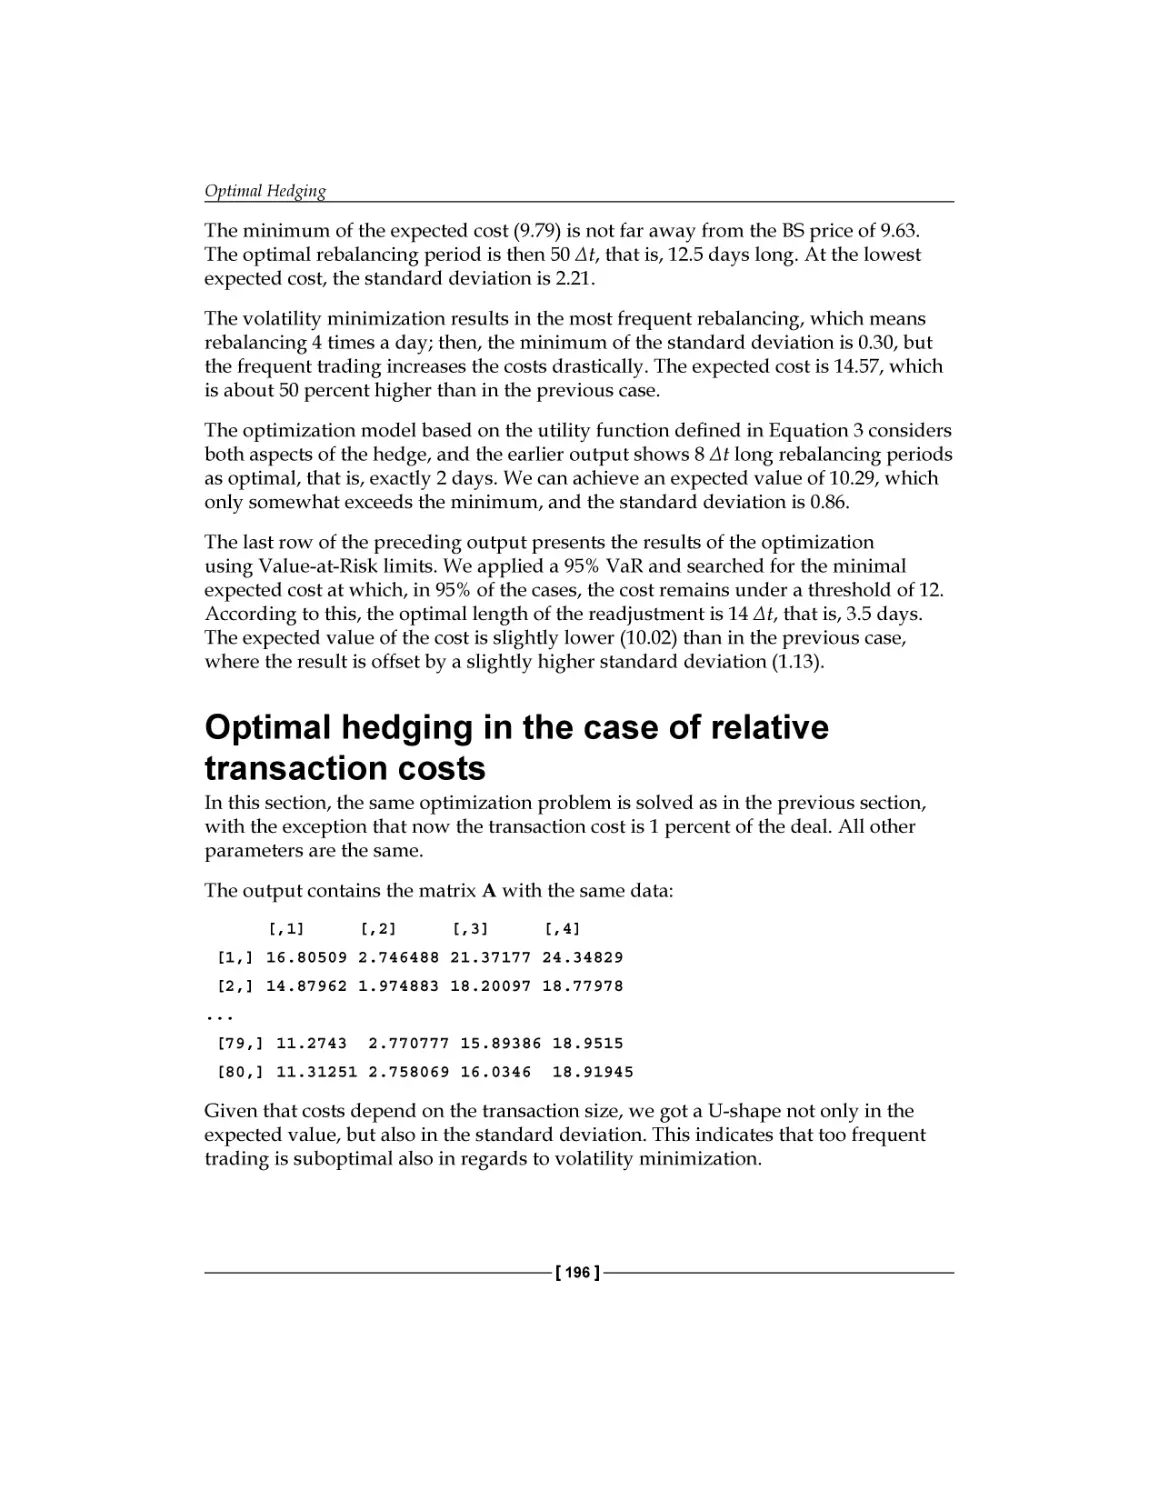 Optimal hedging in the case of relative transaction costs